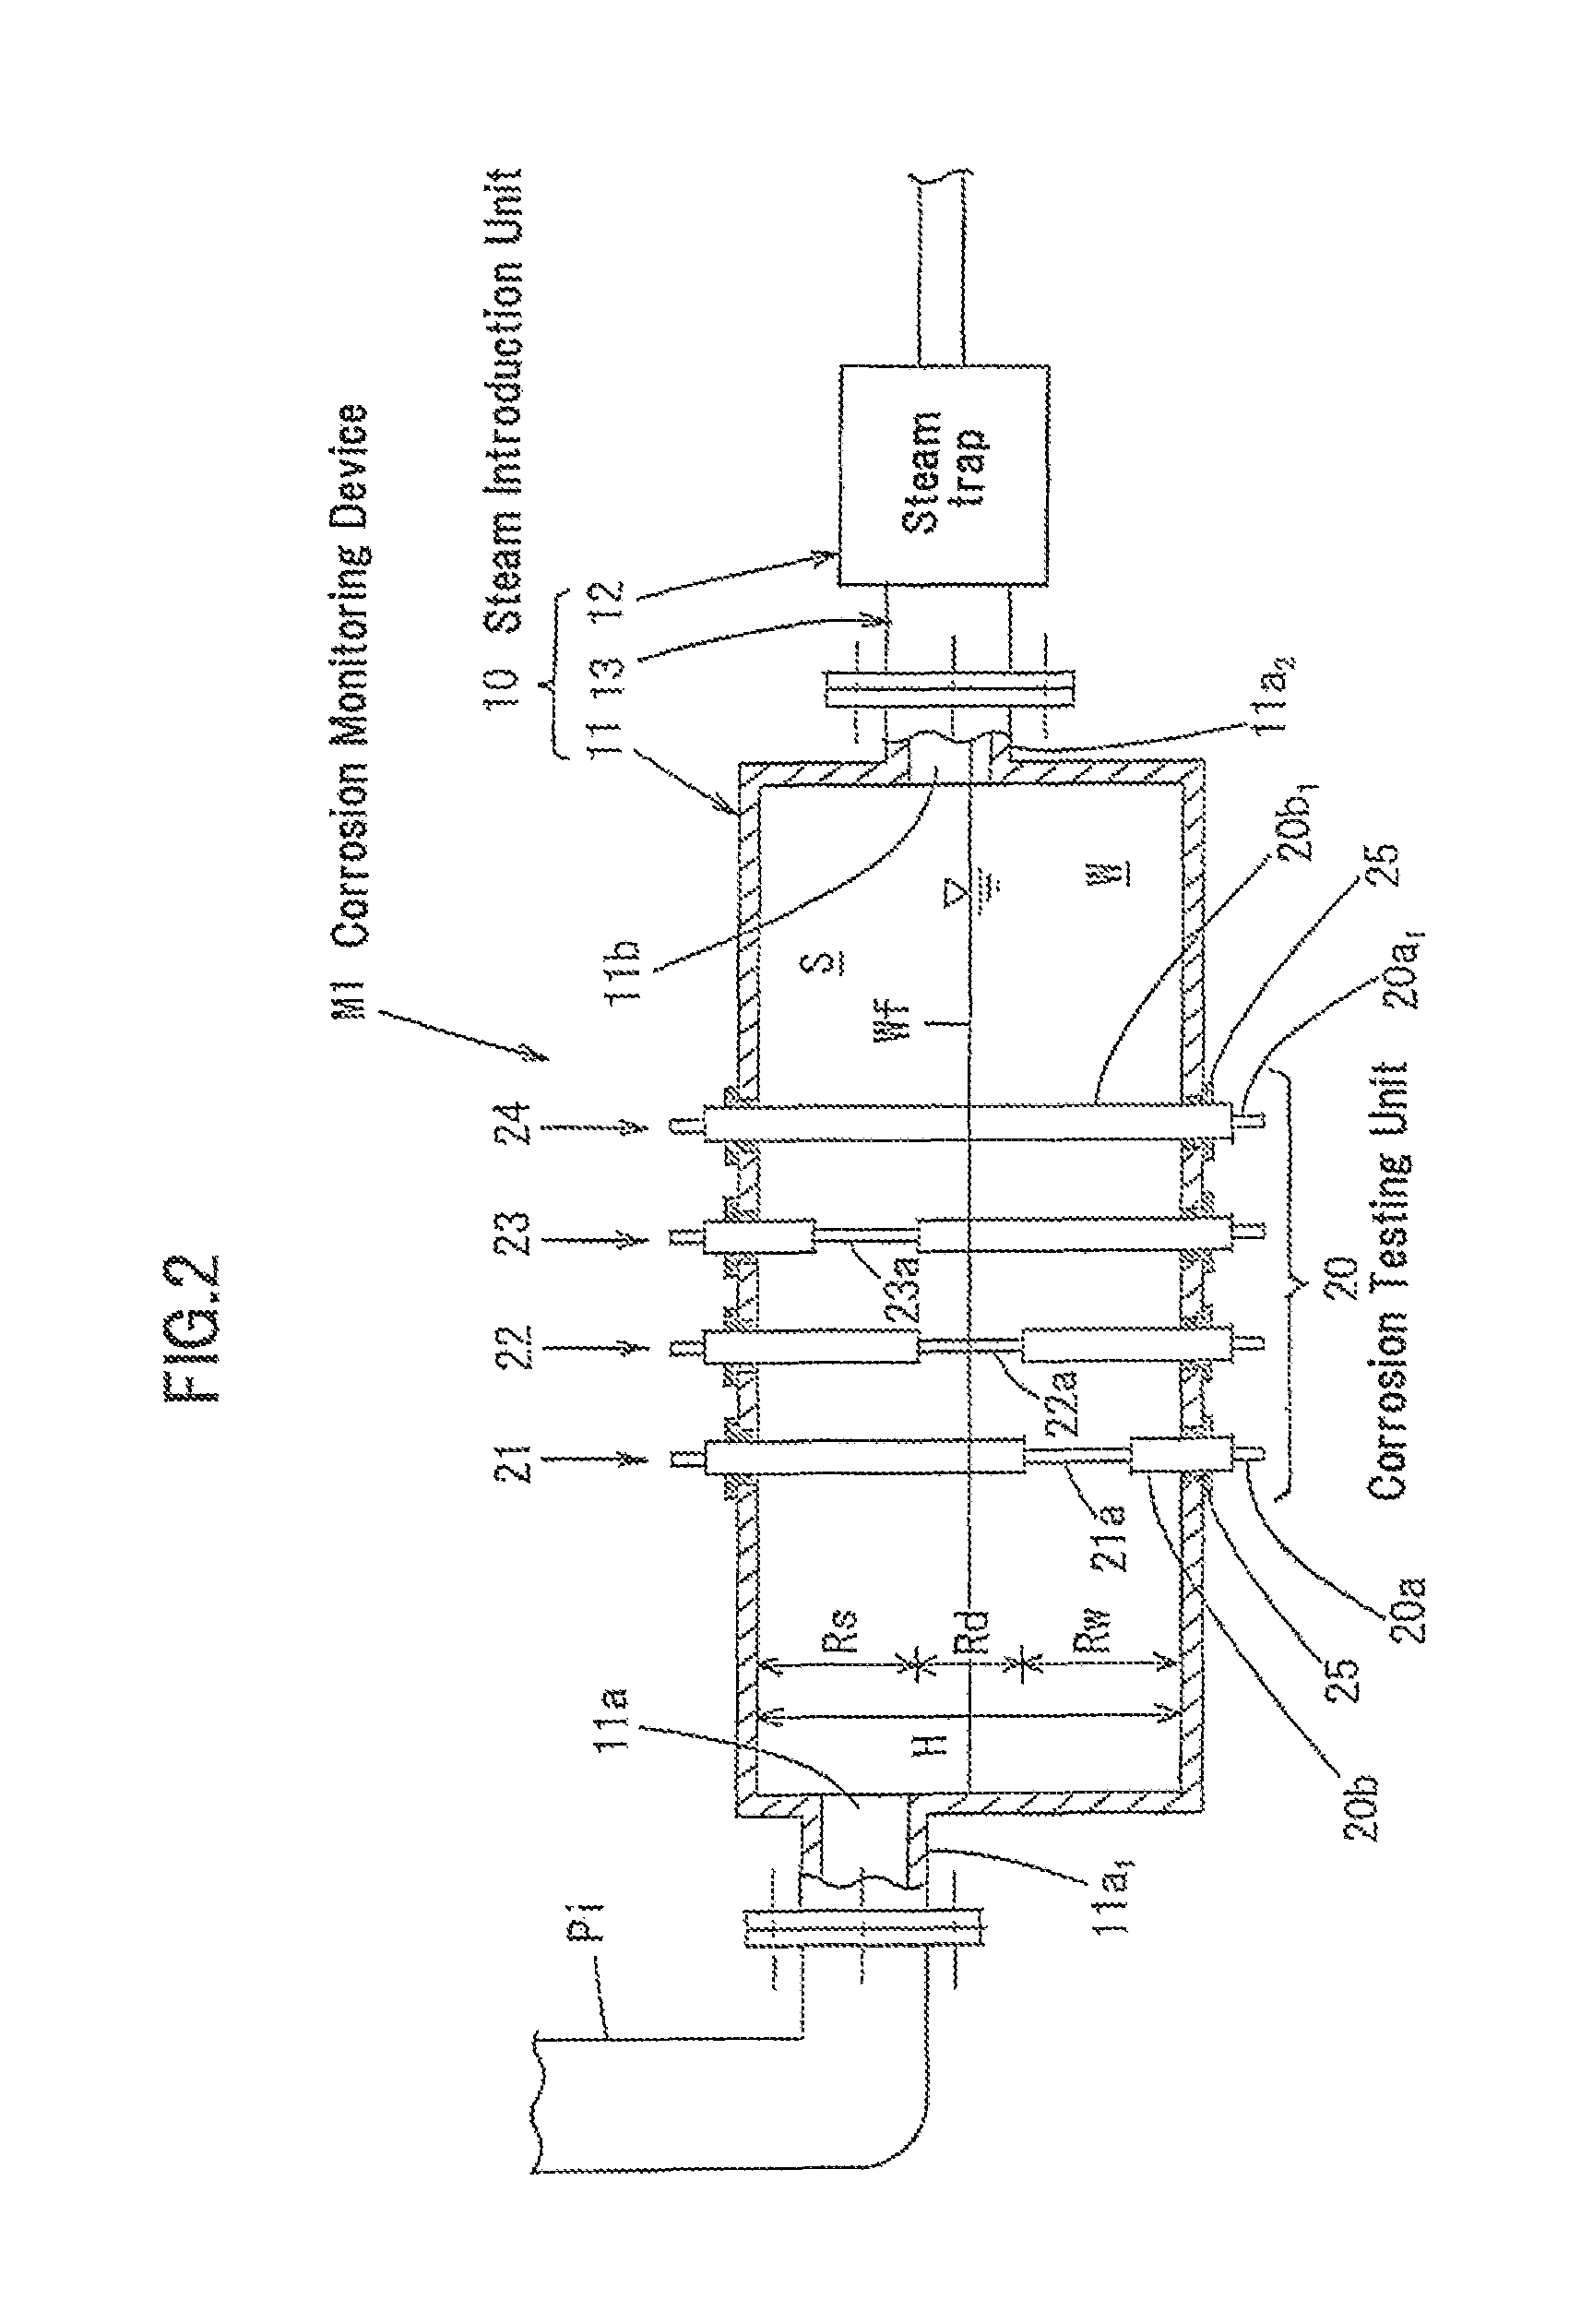 Metal pipe corrosion monitoring device and use thereof